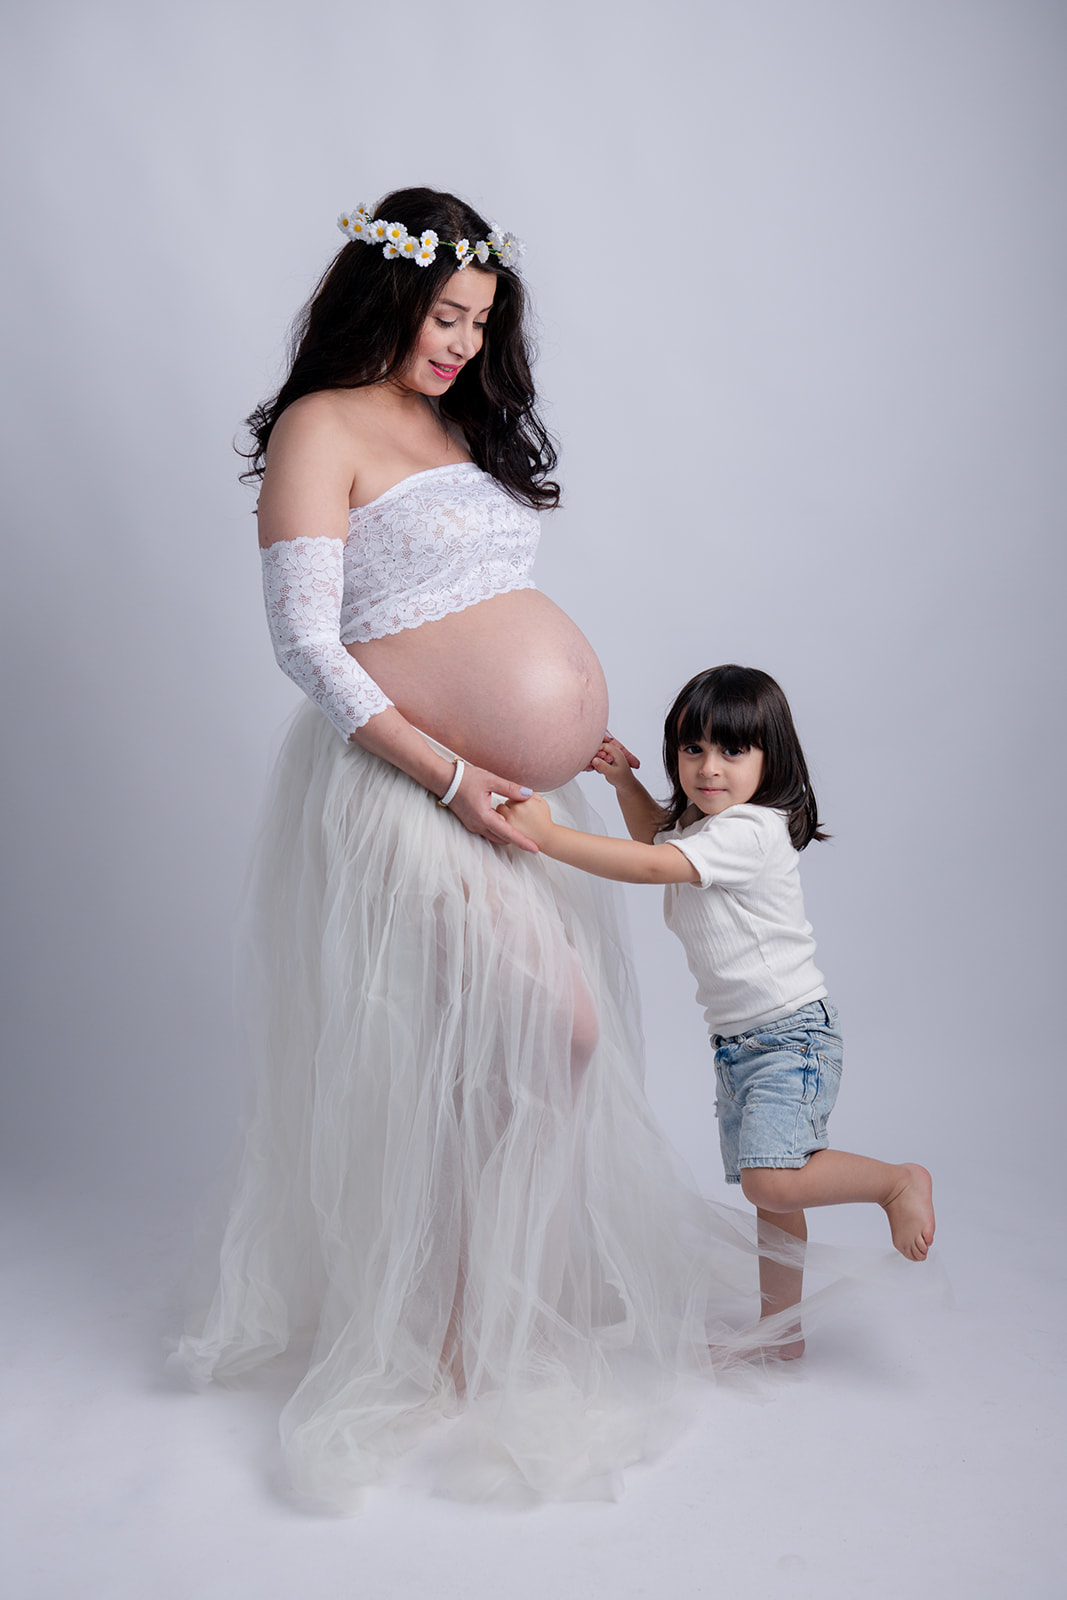 Maternity session with older sibling